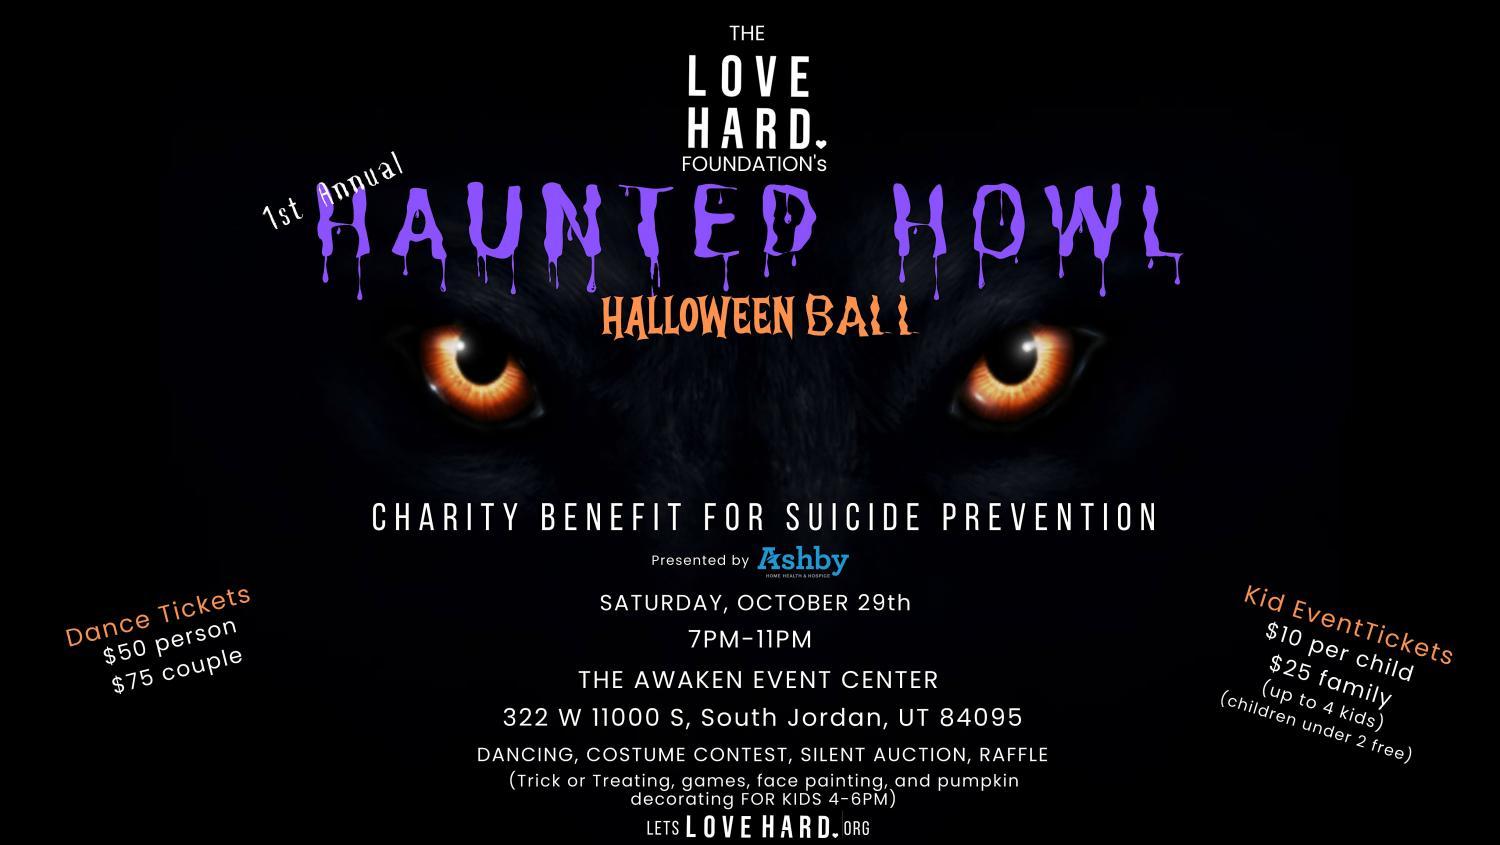 Annual Haunted Howl halloween ball
Sat Oct 29, 7:00 PM - Sat Oct 29, 11:00 PM
in 10 days